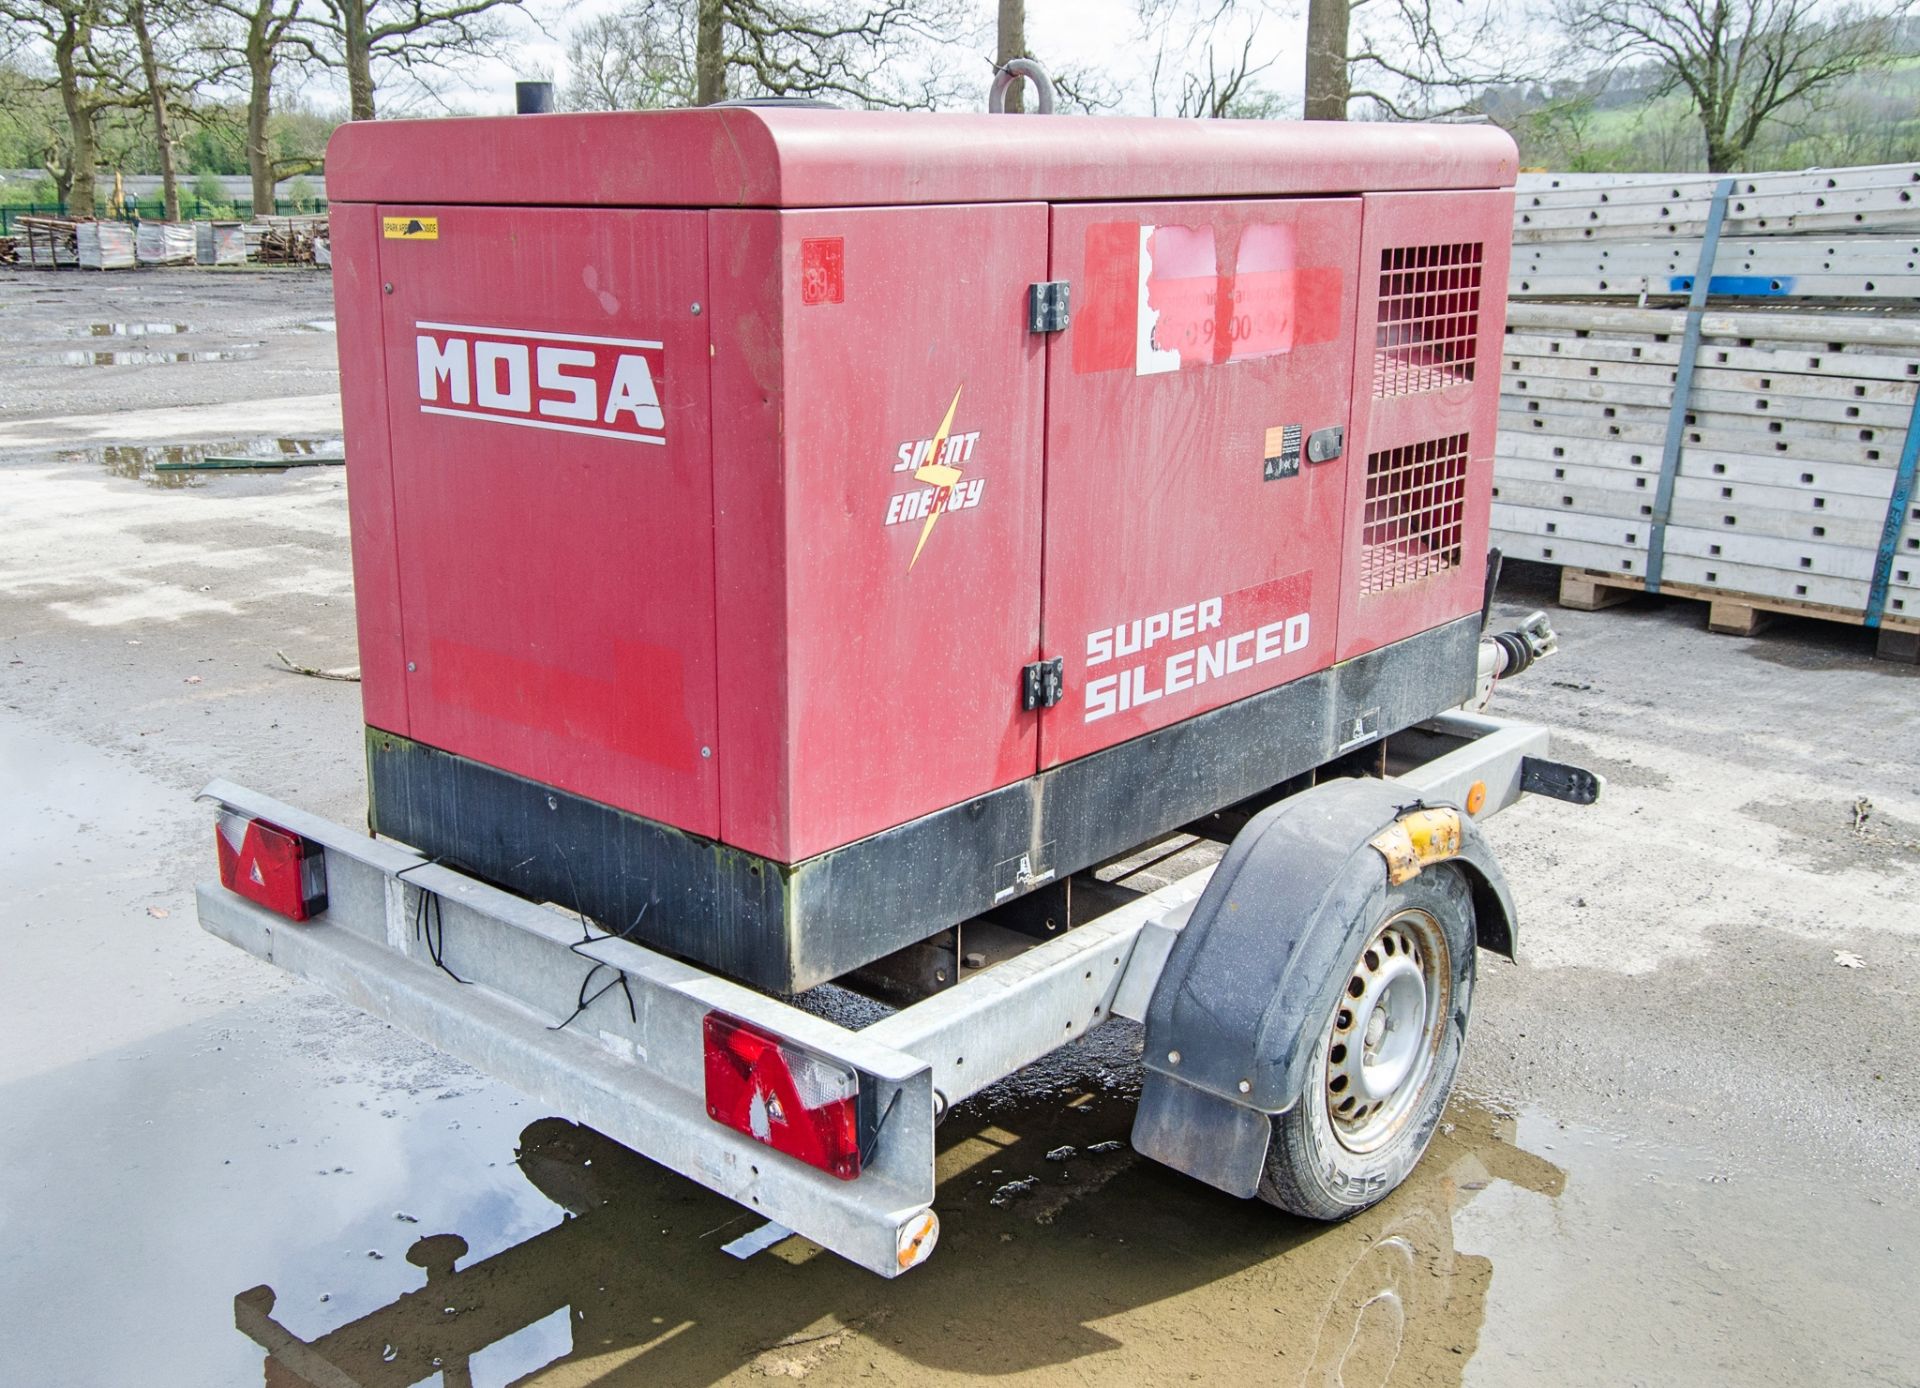 Mosa GE20 YSX 20 kva diesel driven fast tow mobile generator Year: 2015 S/N: 44516 PF00132 - Image 3 of 7